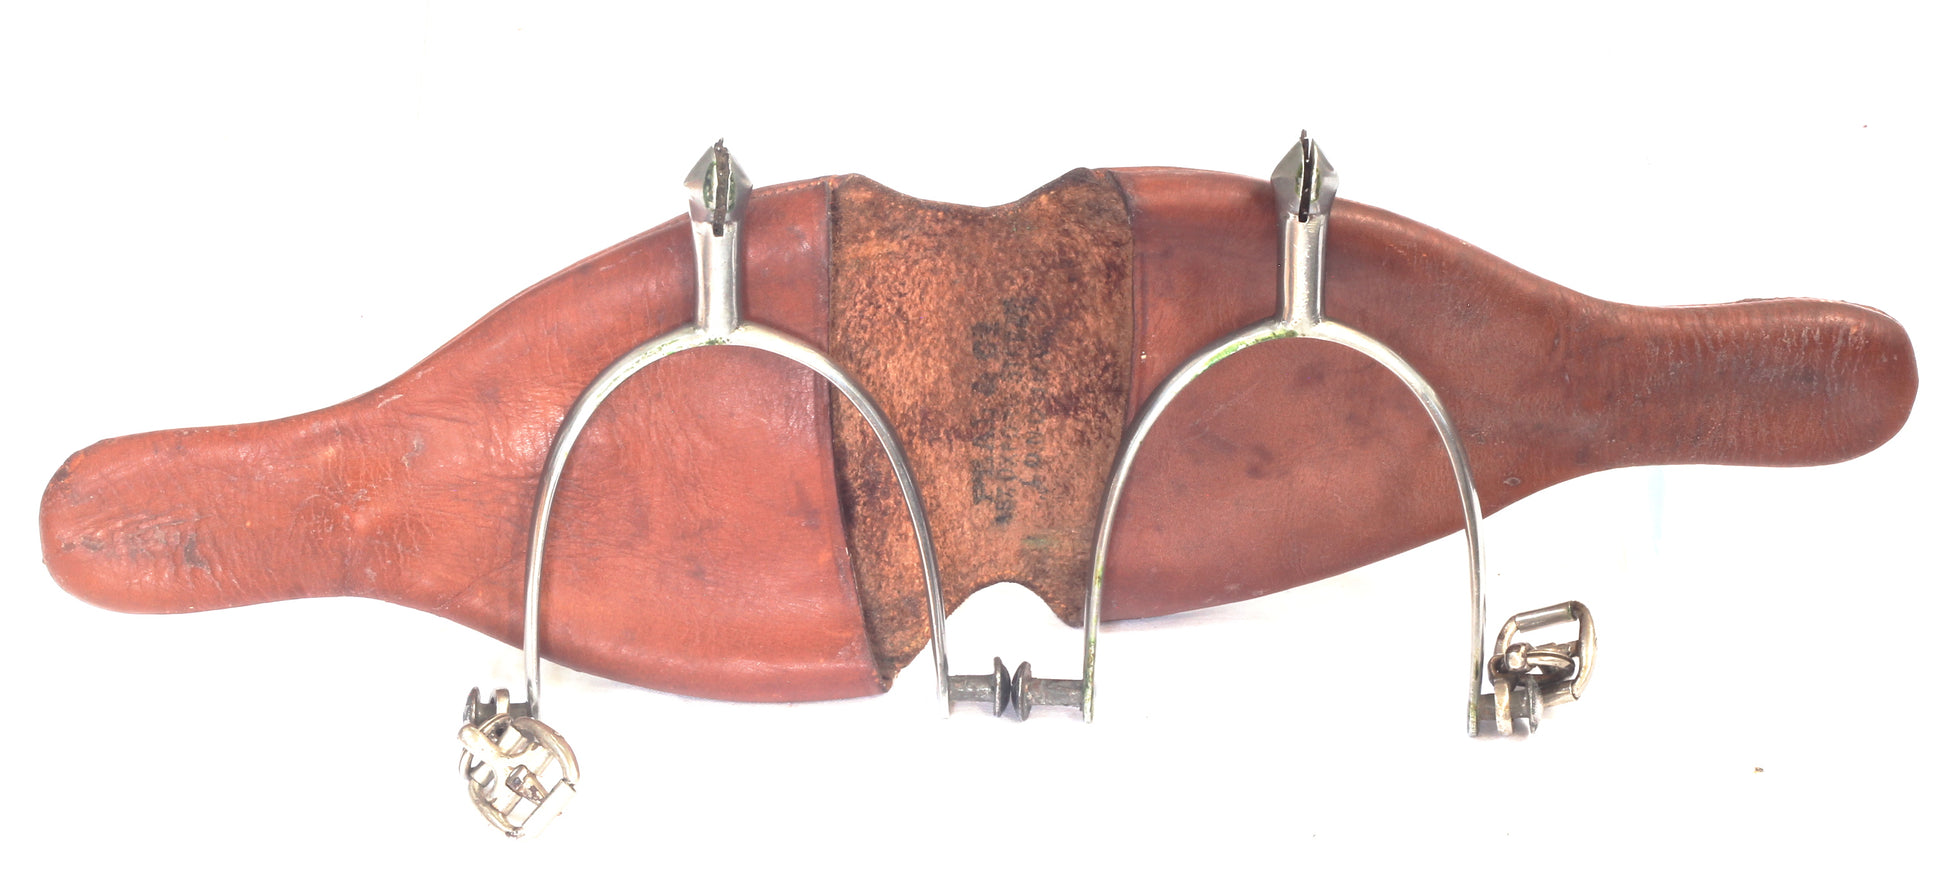 Small Pair of Nickel Spurs in Leather Case